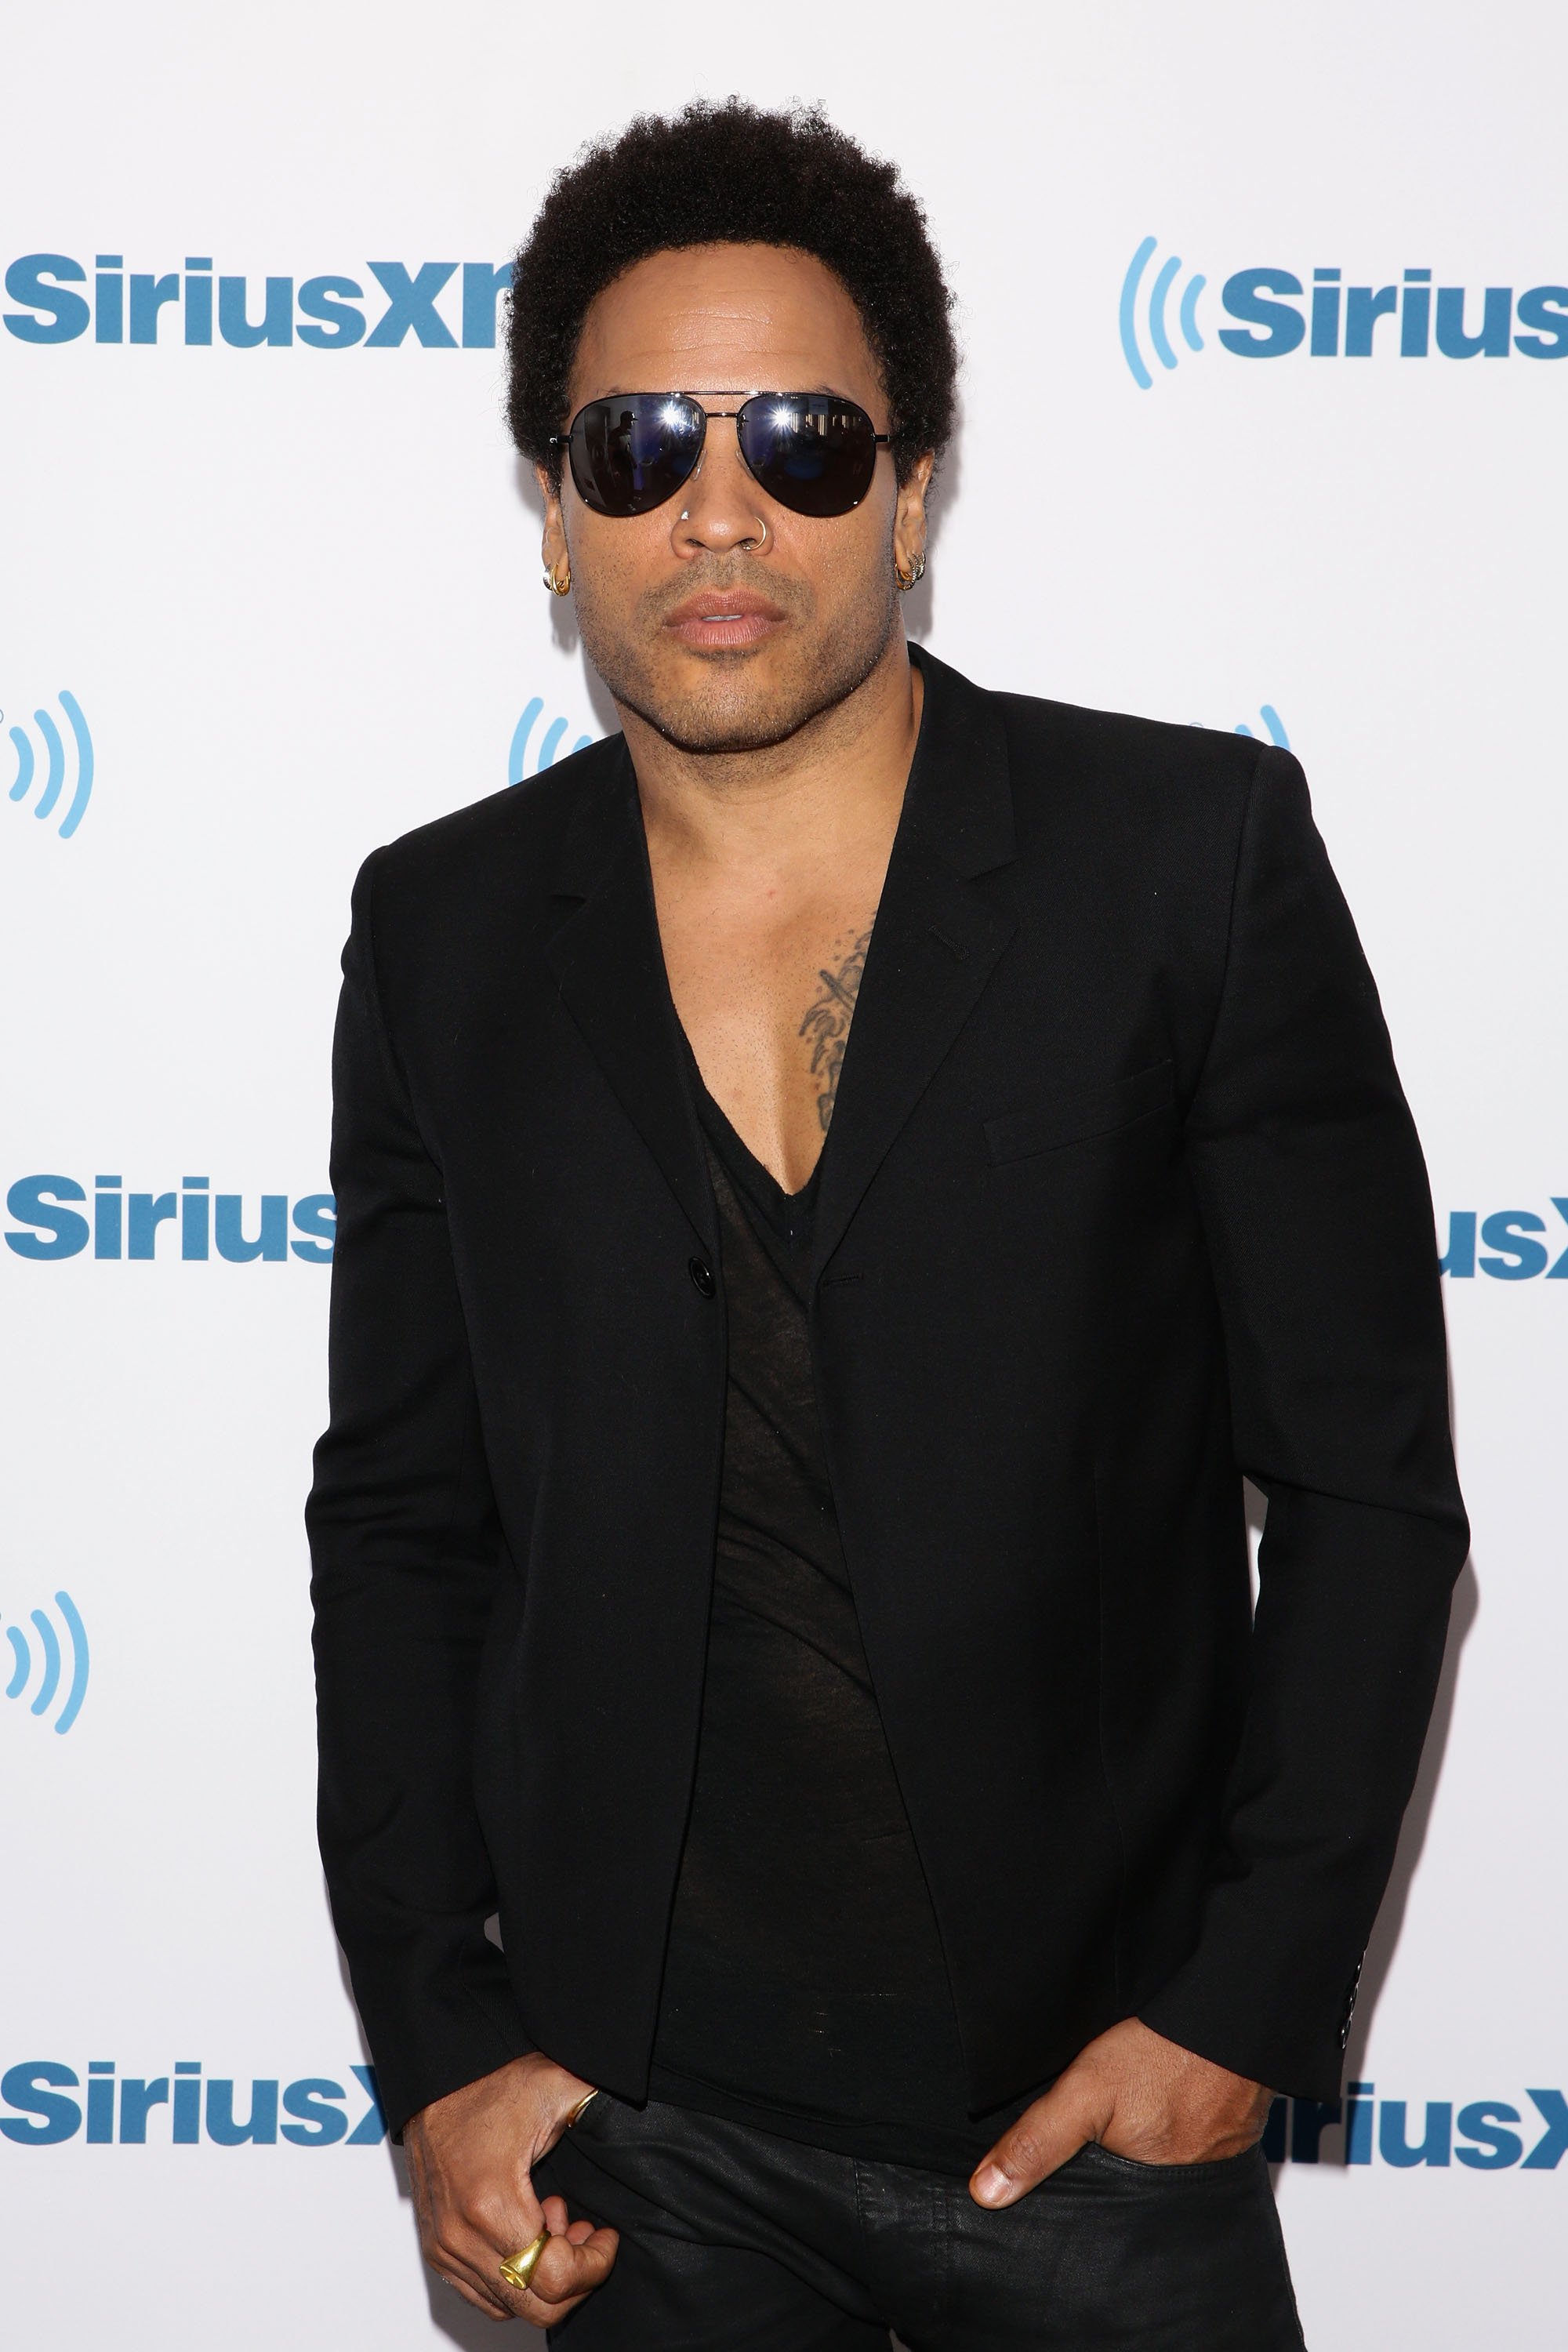 Lenny Kravitz at the SiriusXM Studios on June 16, 2014 in New York City. | Source: Getty Images